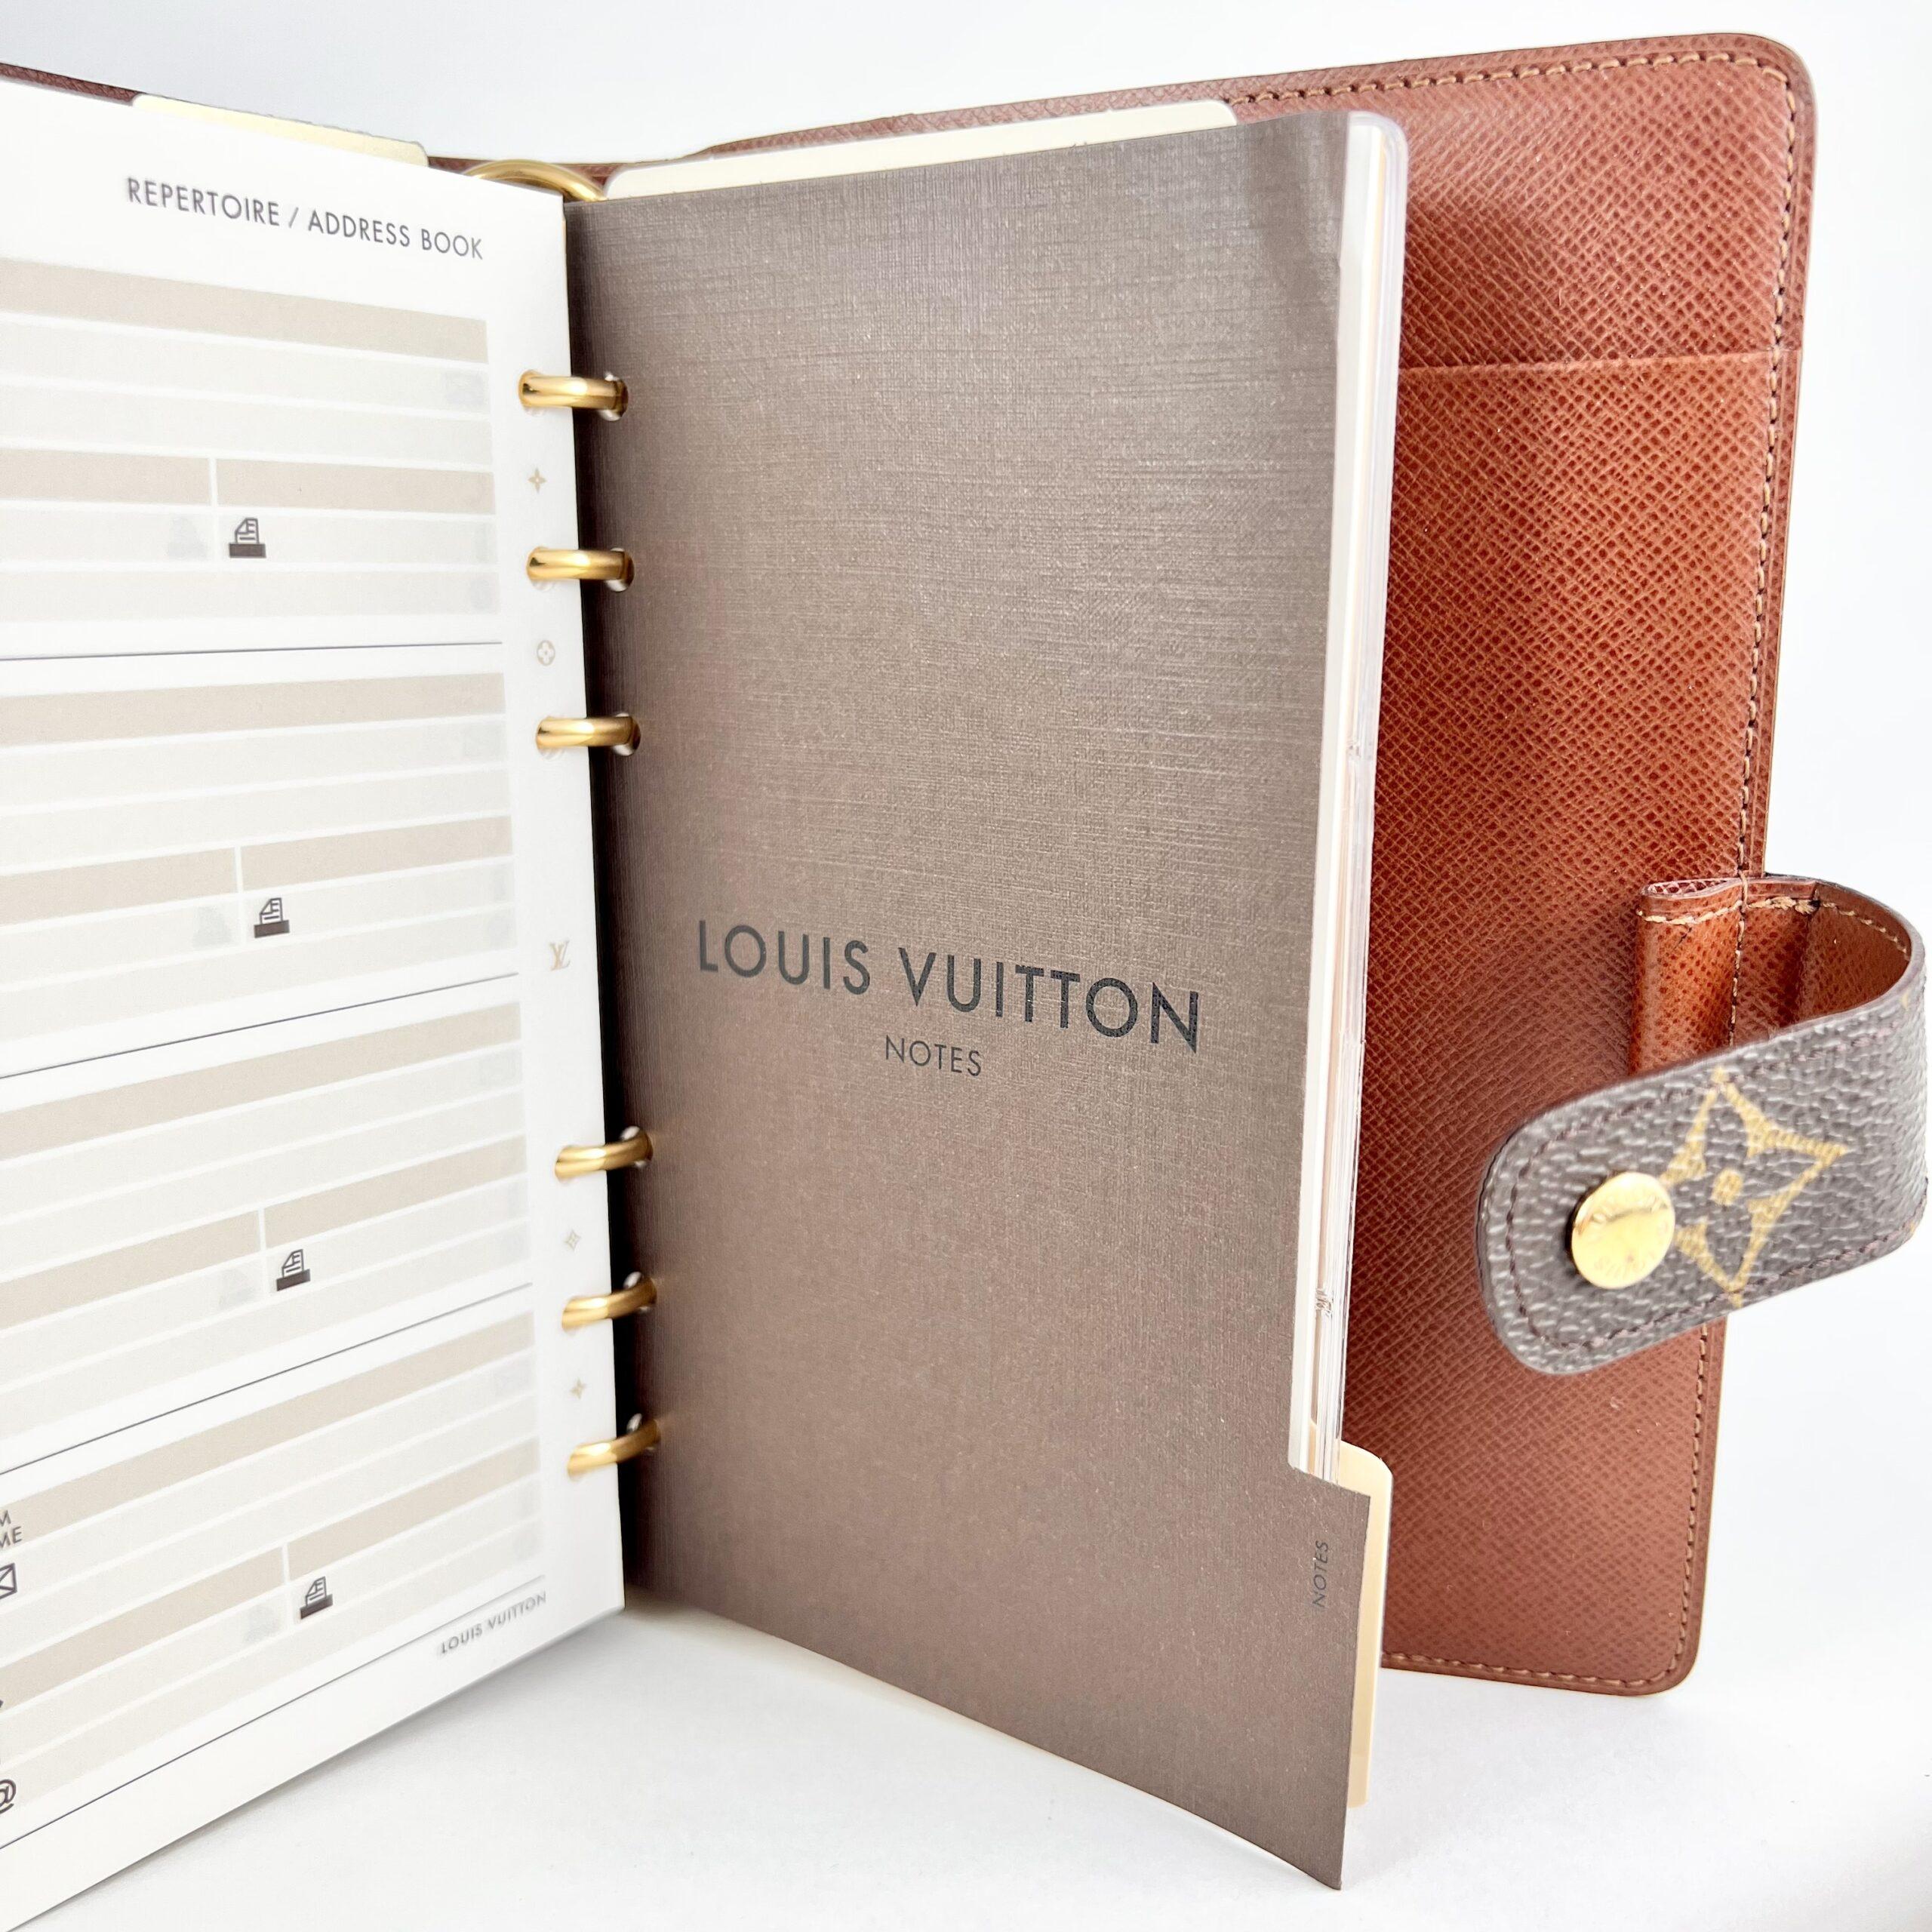 Louis Vuitton Monogram Agenda Address Book and Planner with Card Holder